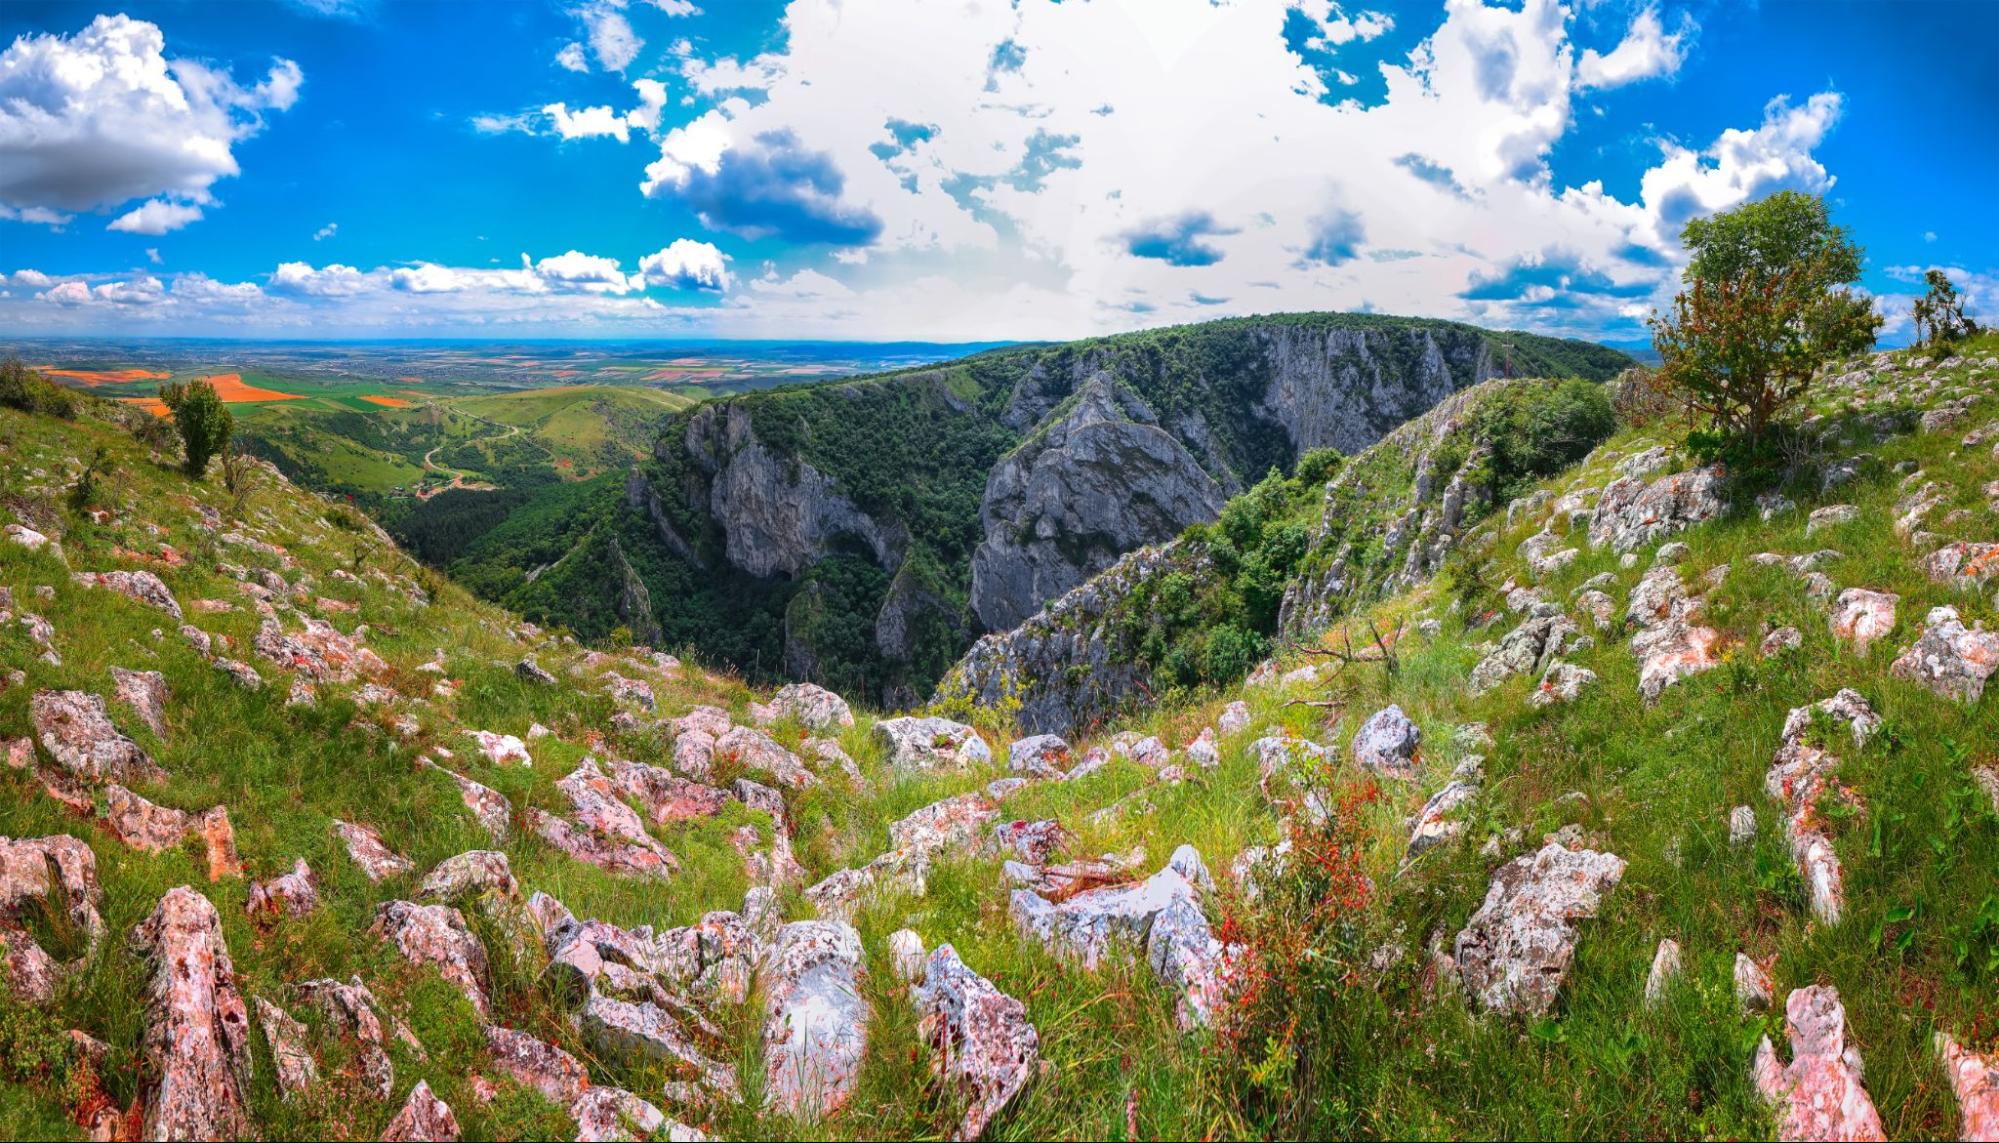 Turda gorge Cheile Turzii is a natural reserve with marked trails for hikes on Hasdate River situated near Turda close to Cluj-Napoca, in Transylvania, Romania, Europe